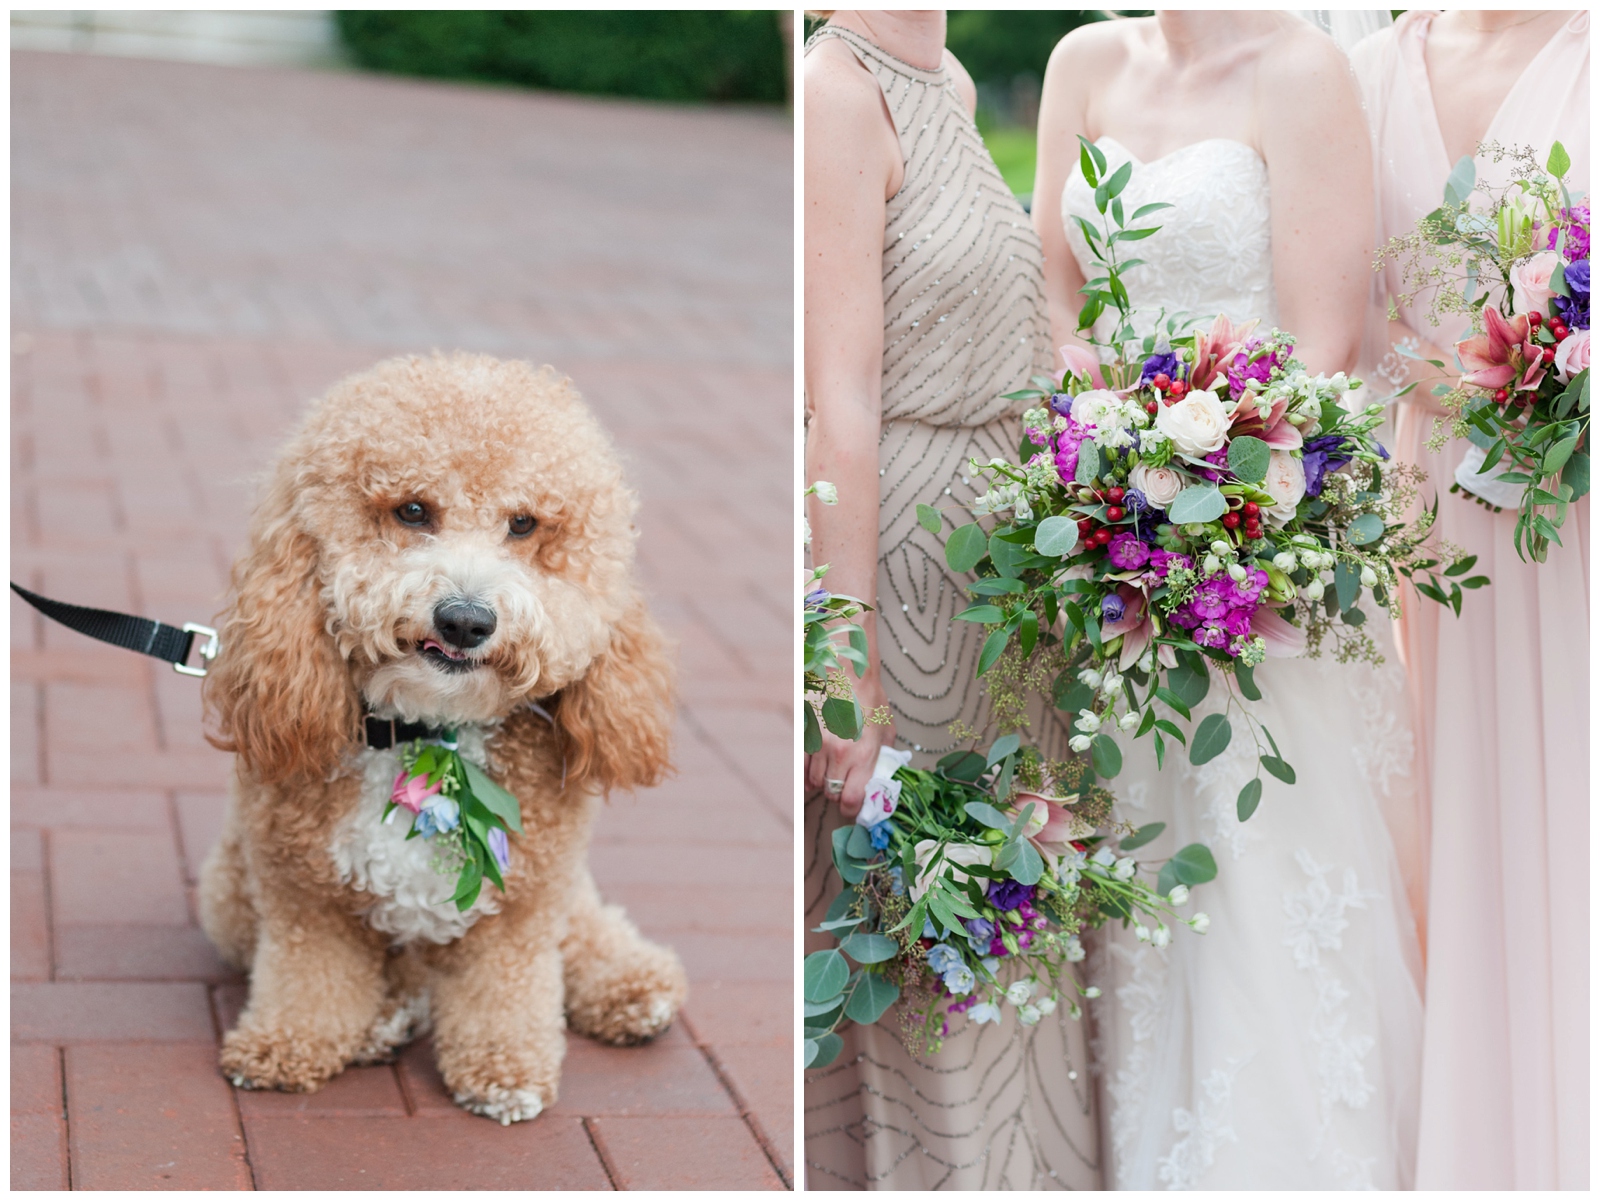 Franklin Park Conservatory Wedding Venue The John F. Wolfe Plam House wedding ceremony. Wedding ceremonies in the bridal garden with a reception in The Grove and The Palm House. Best places to have your wedding if it rains. Golden doodle dog and blush bridesmaids dresses